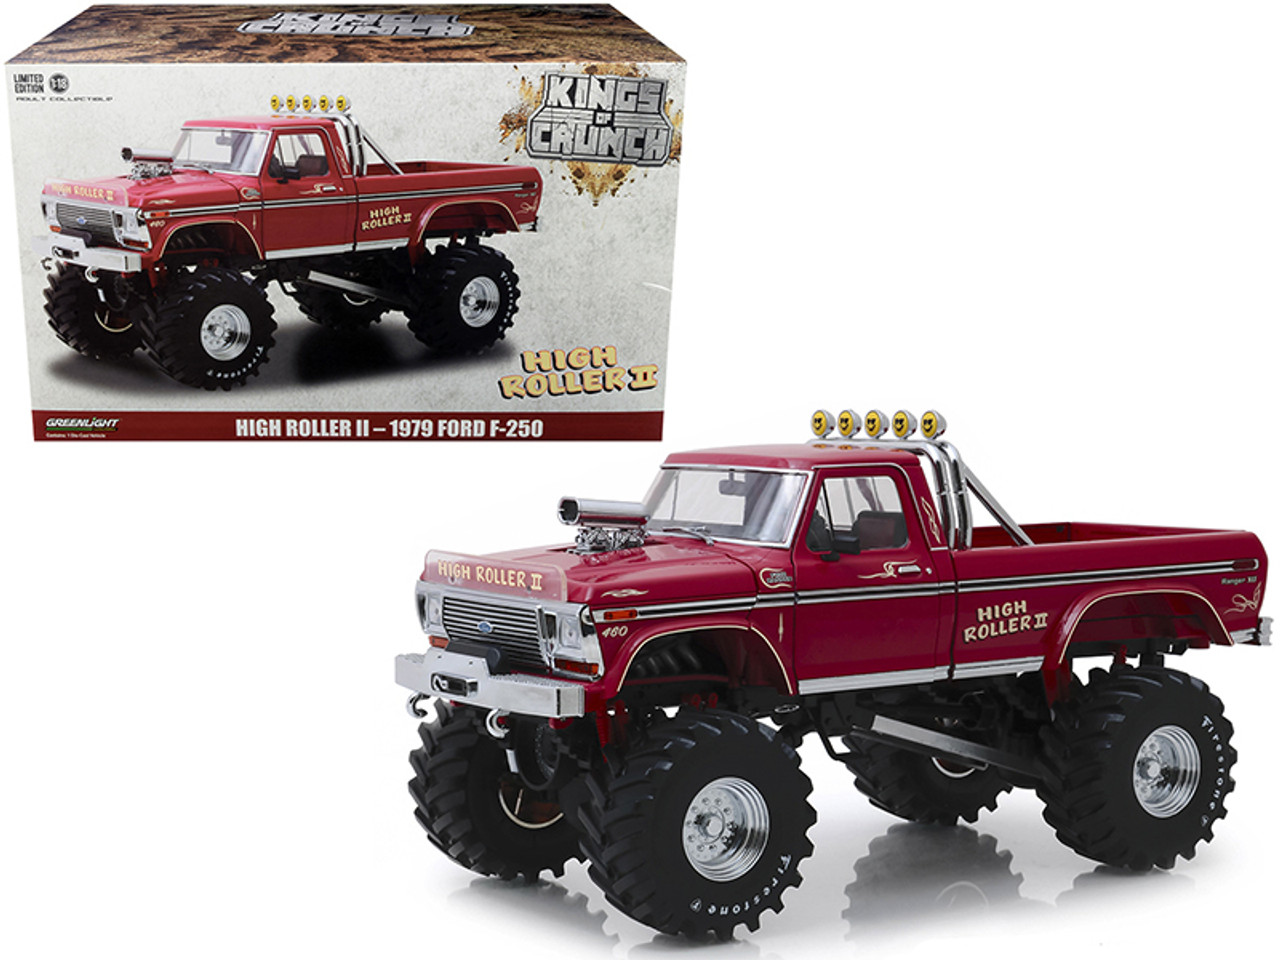 1979 Ford F-250 Ranger XLT Monster Truck "High Roller II" Burgundy with 48-Inch Tires "Kings of Crunch" 1/18 Diecast Model Car by Greenlight